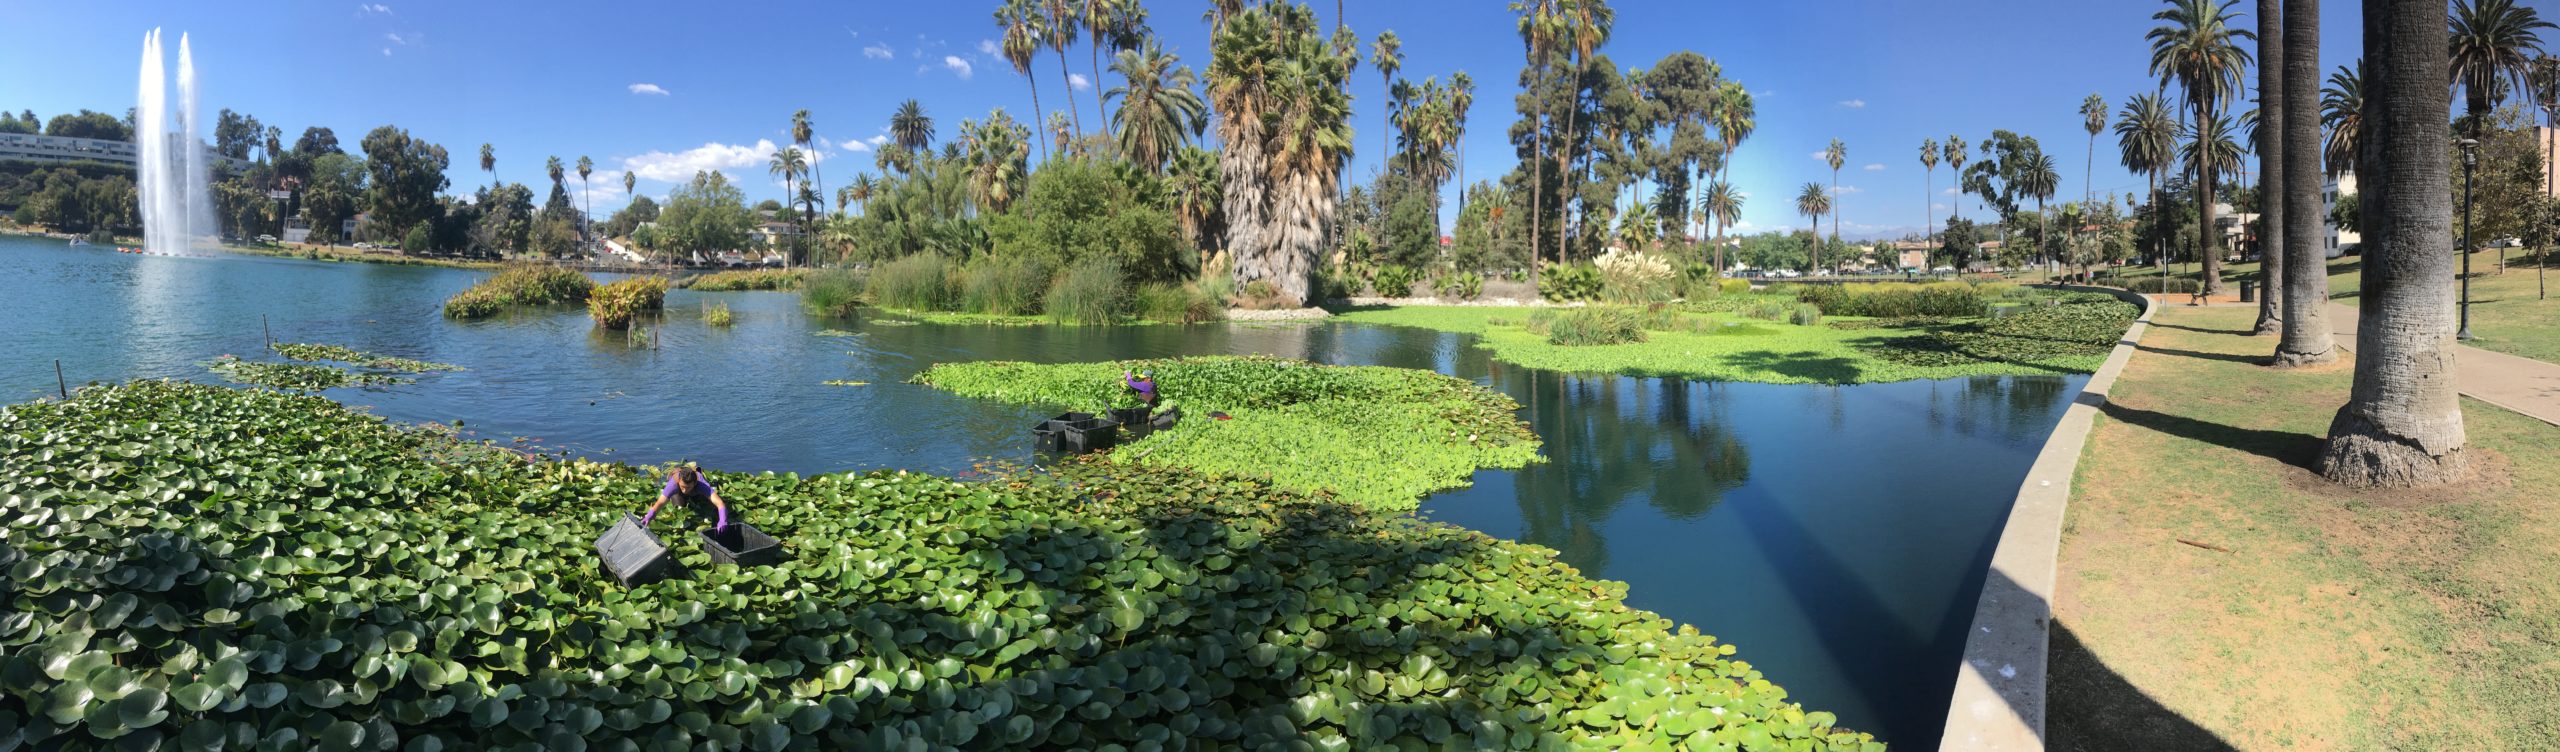 Echo Park Lake in Los Angeles - Explore an Oasis of Fountains and Palm  Trees in Los Angeles – Go Guides